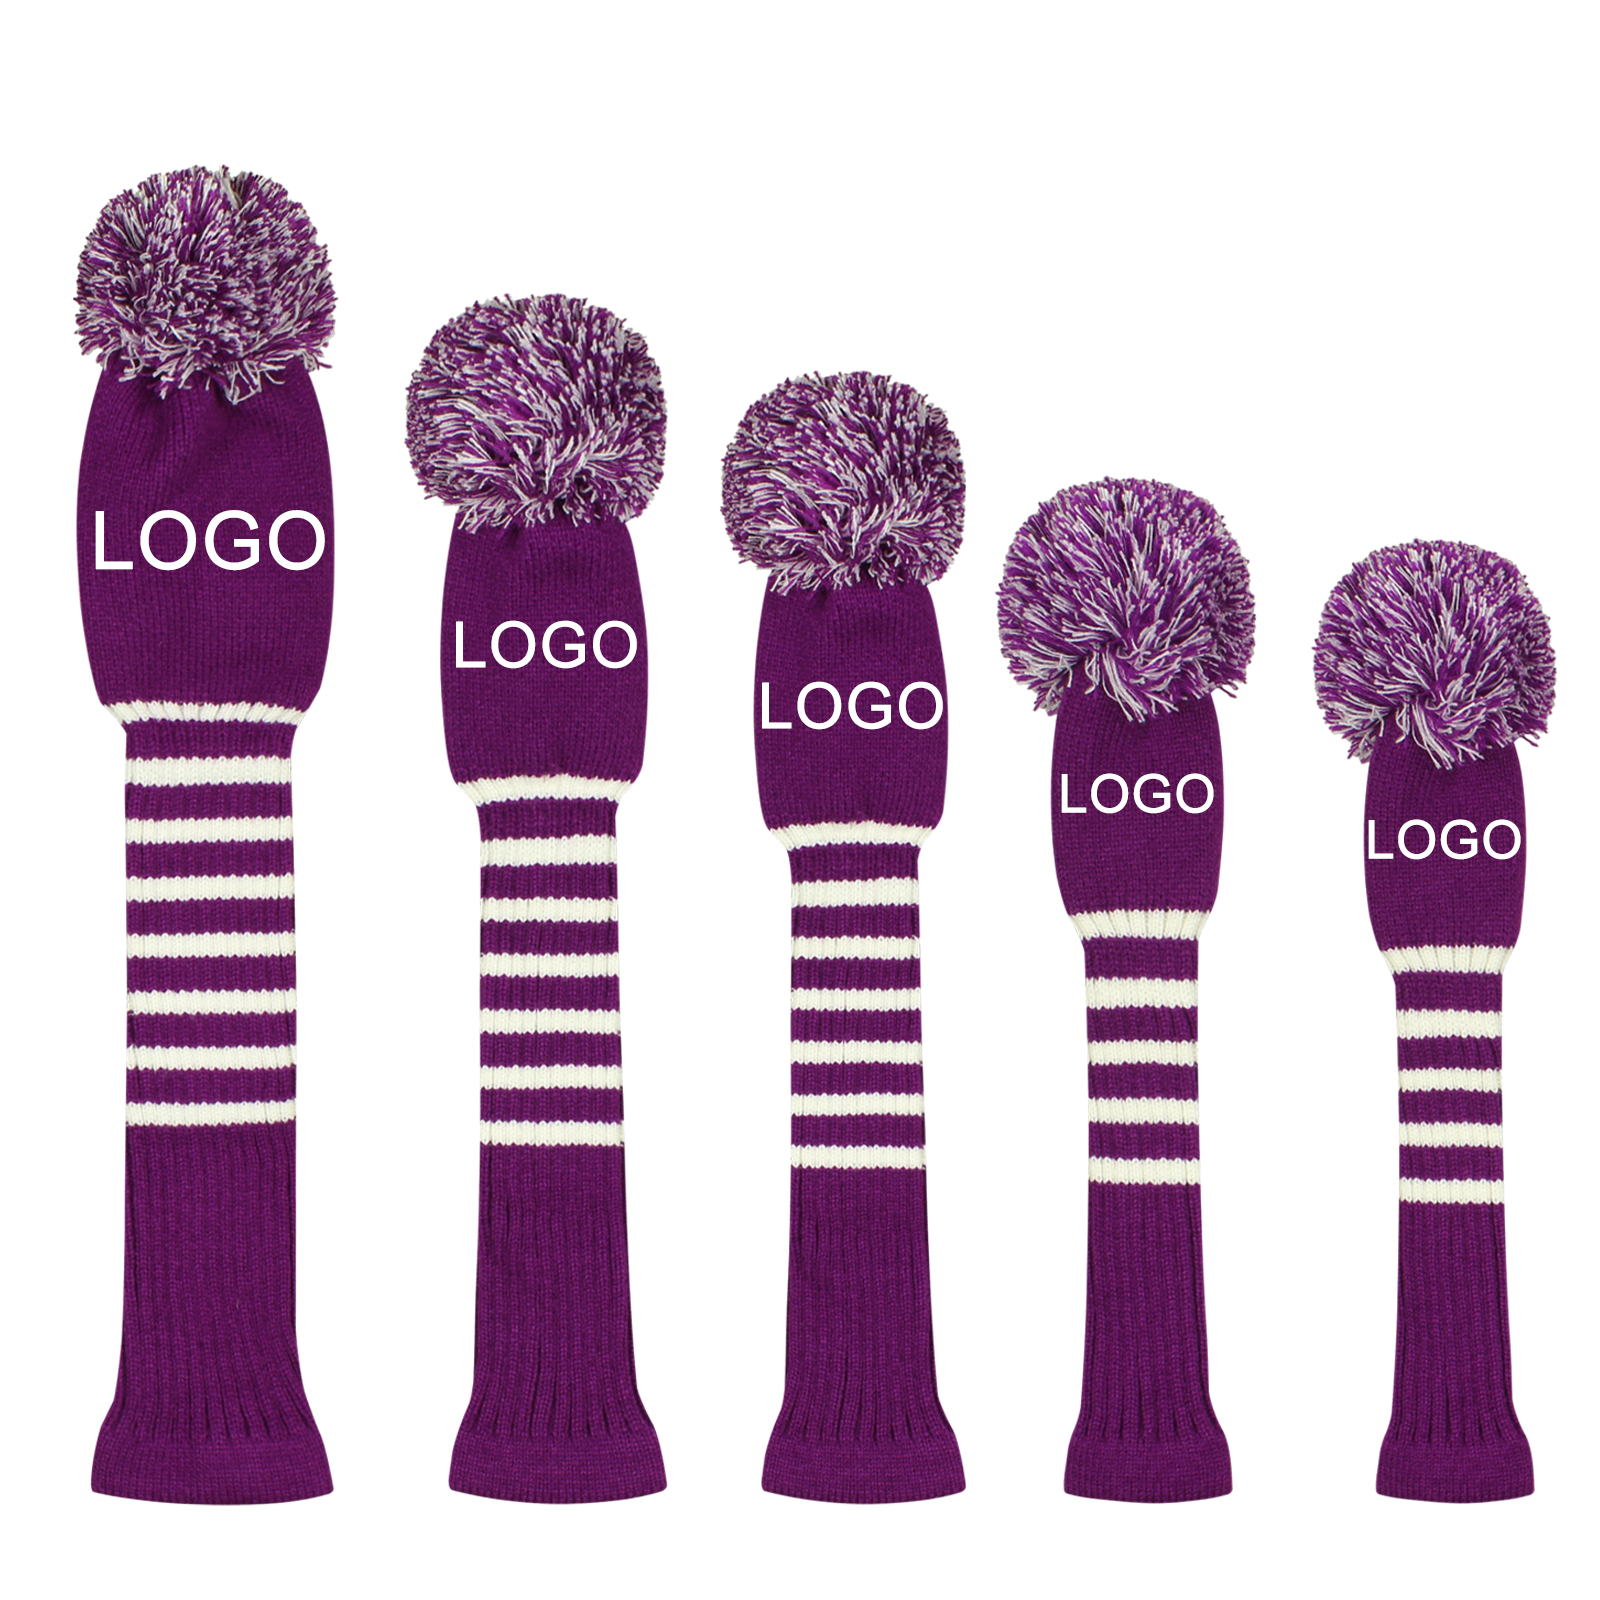 Scott Edward Custom Pom Pom Golf Head Covers Fit Max Drivers Fairways Hybrids/Utility with Rotating Number Tags (Purple)